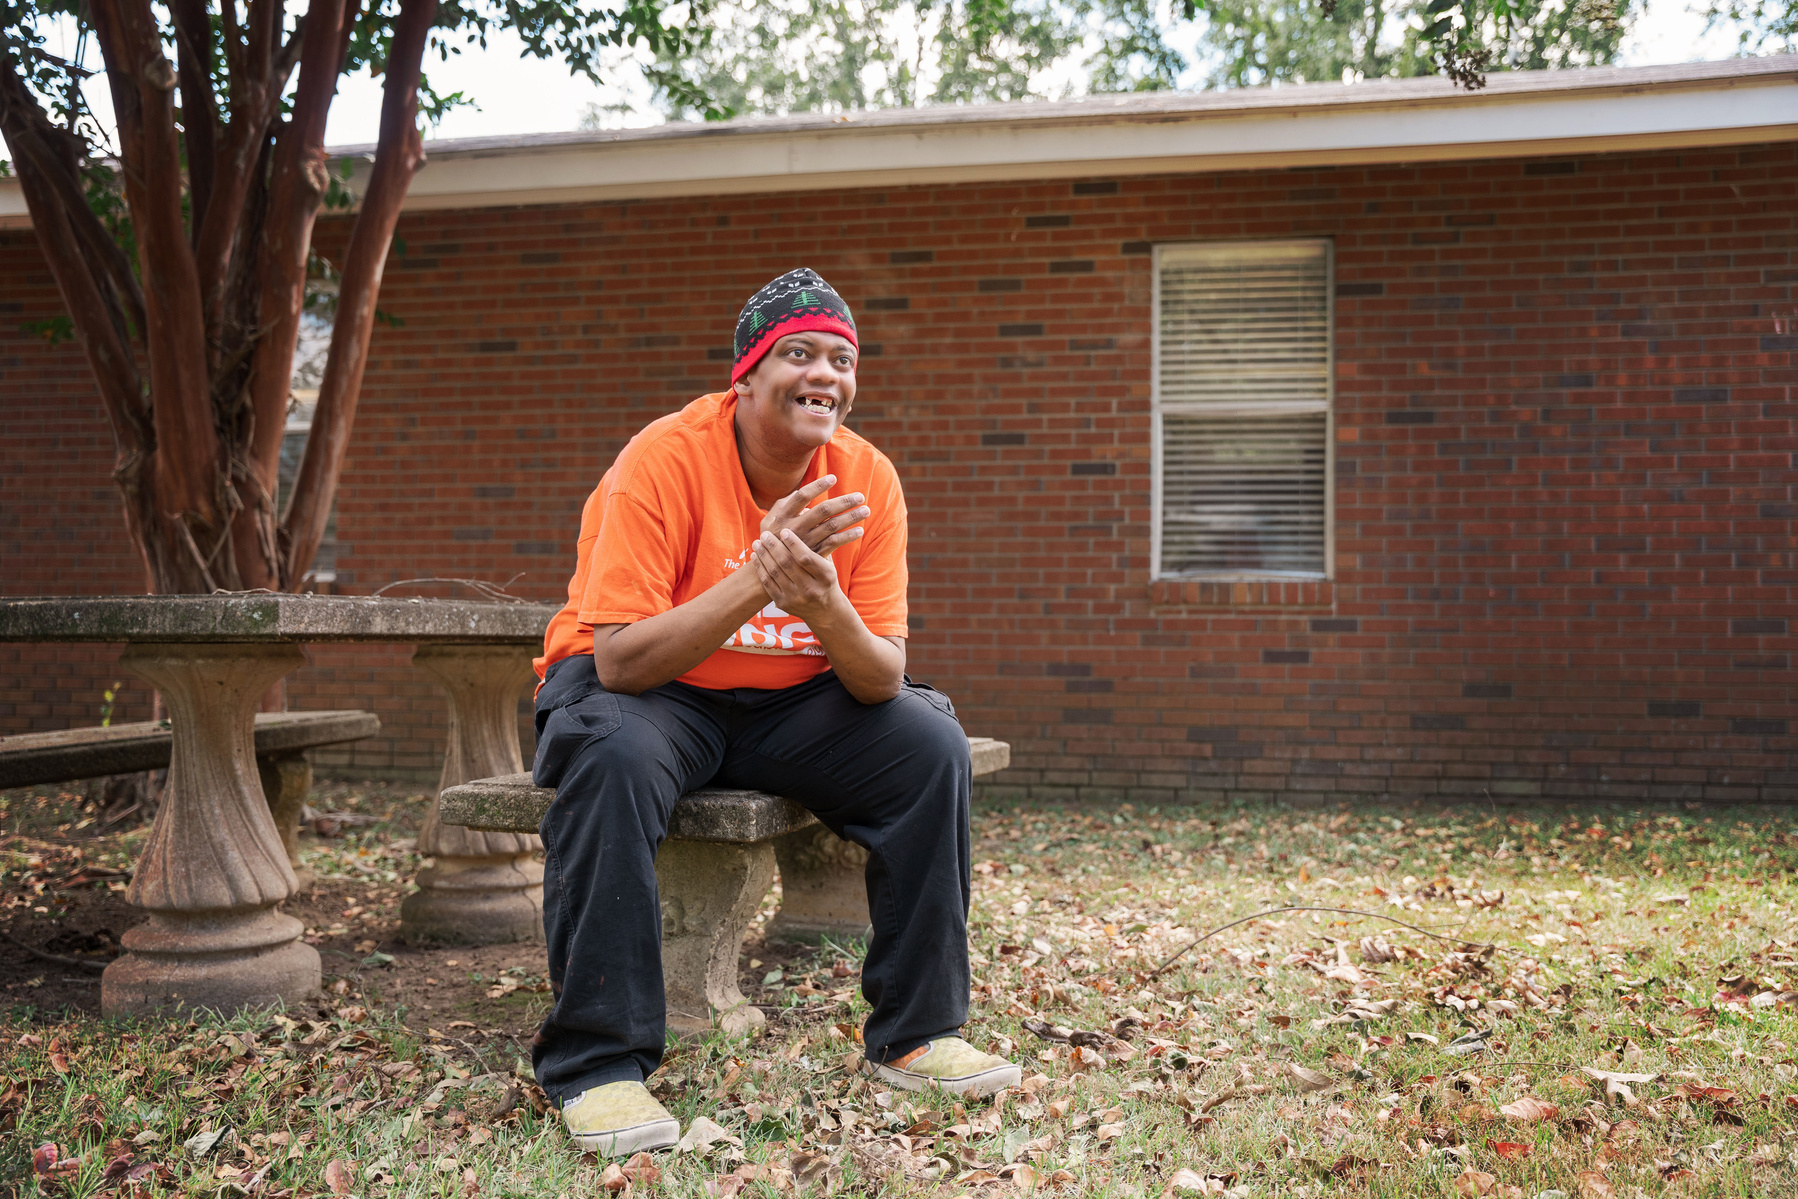 A man in an orange shirt and knit cap sits outside on a bench smiling.